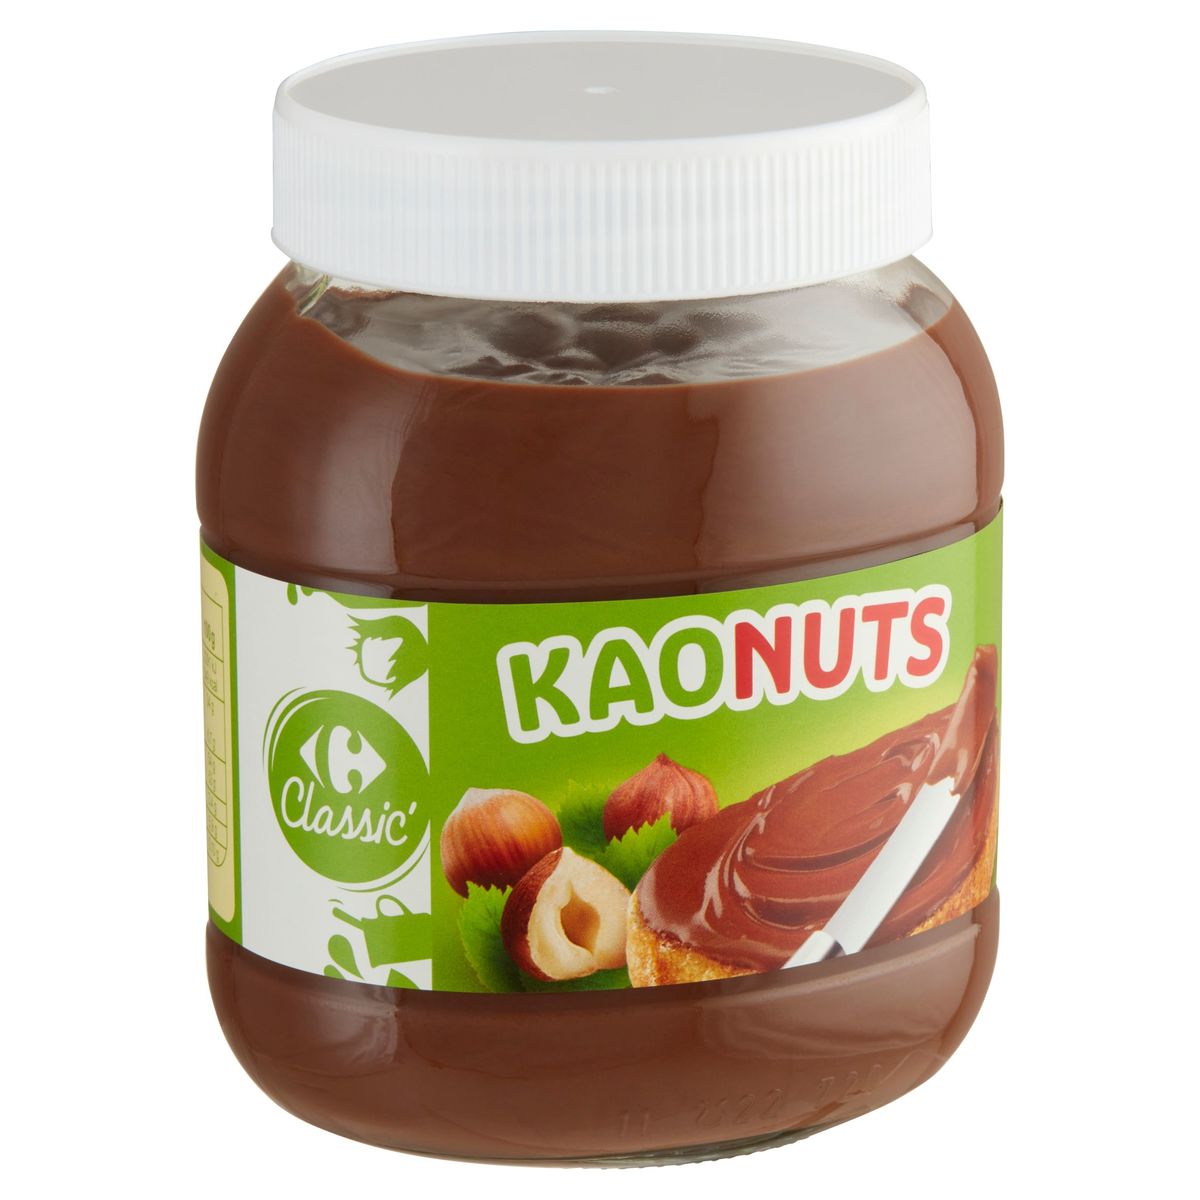 Carrefour Classic' Κaοnuts 750 g